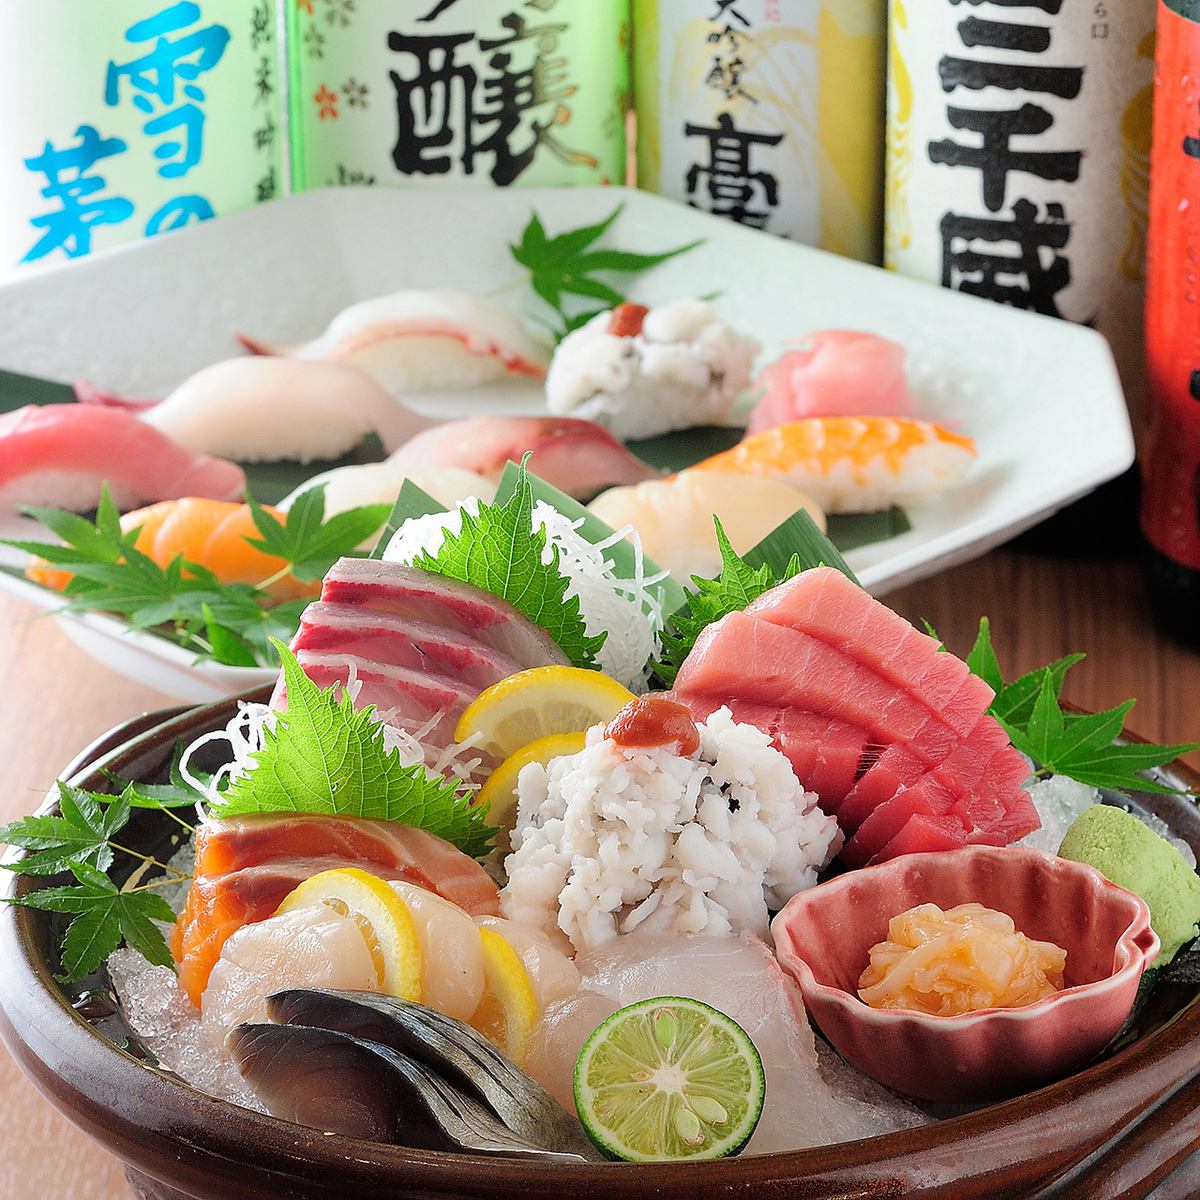 ★ Speaking of local sake and seafood, Miotsukushi! A 2-minute walk from the north exit of JR Tennoji Station!